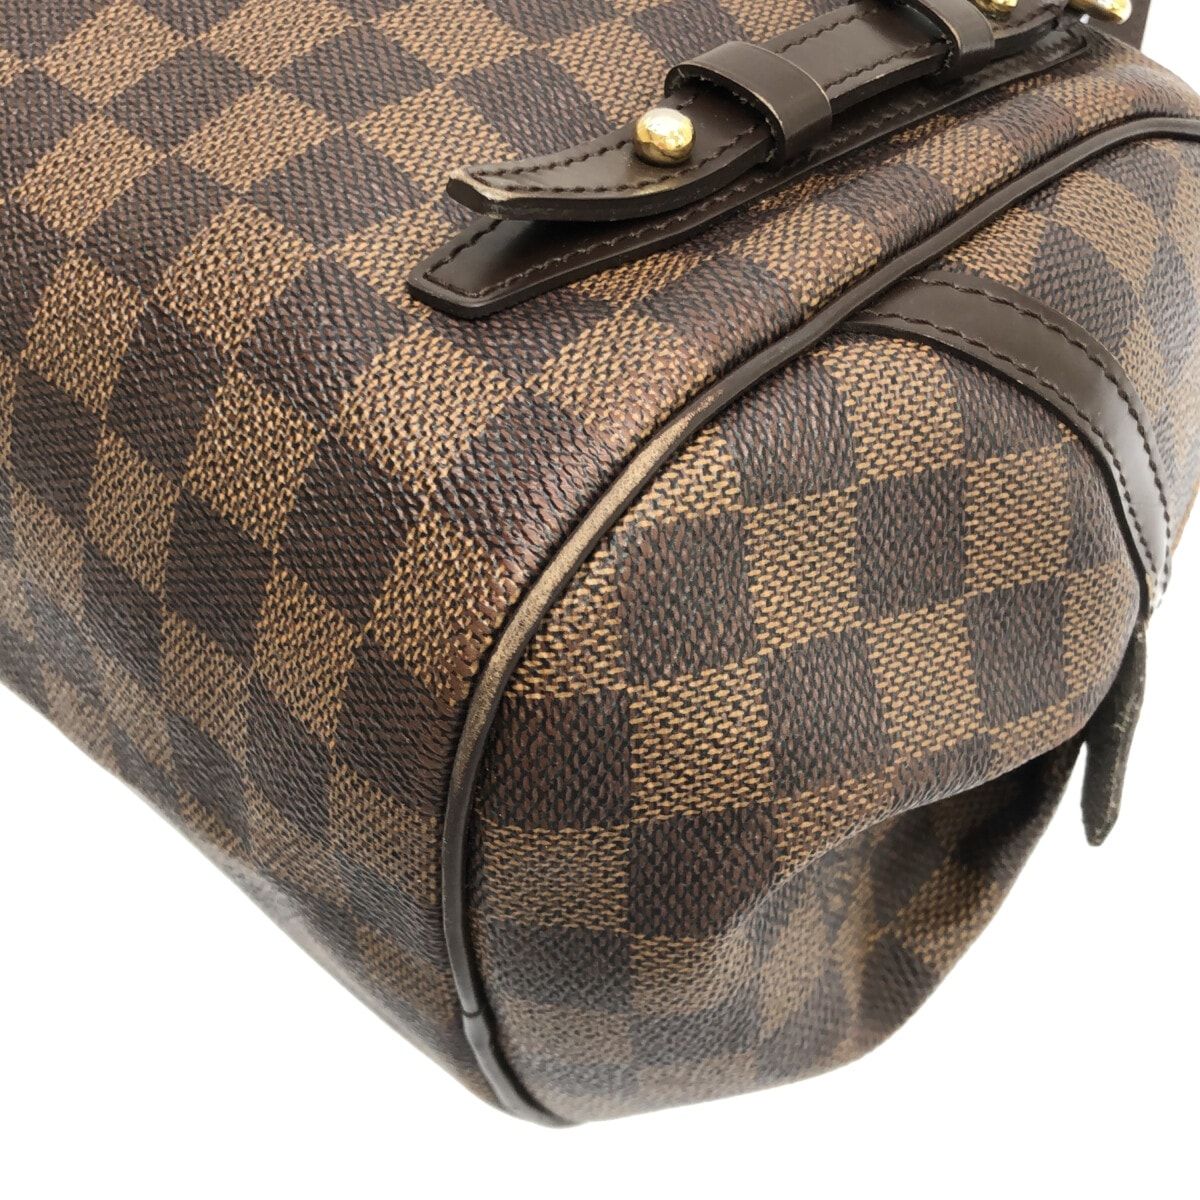 LOUIS VUITTON(ルイヴィトン) ショルダーバッグ ダミエ リヴィントンPM ...